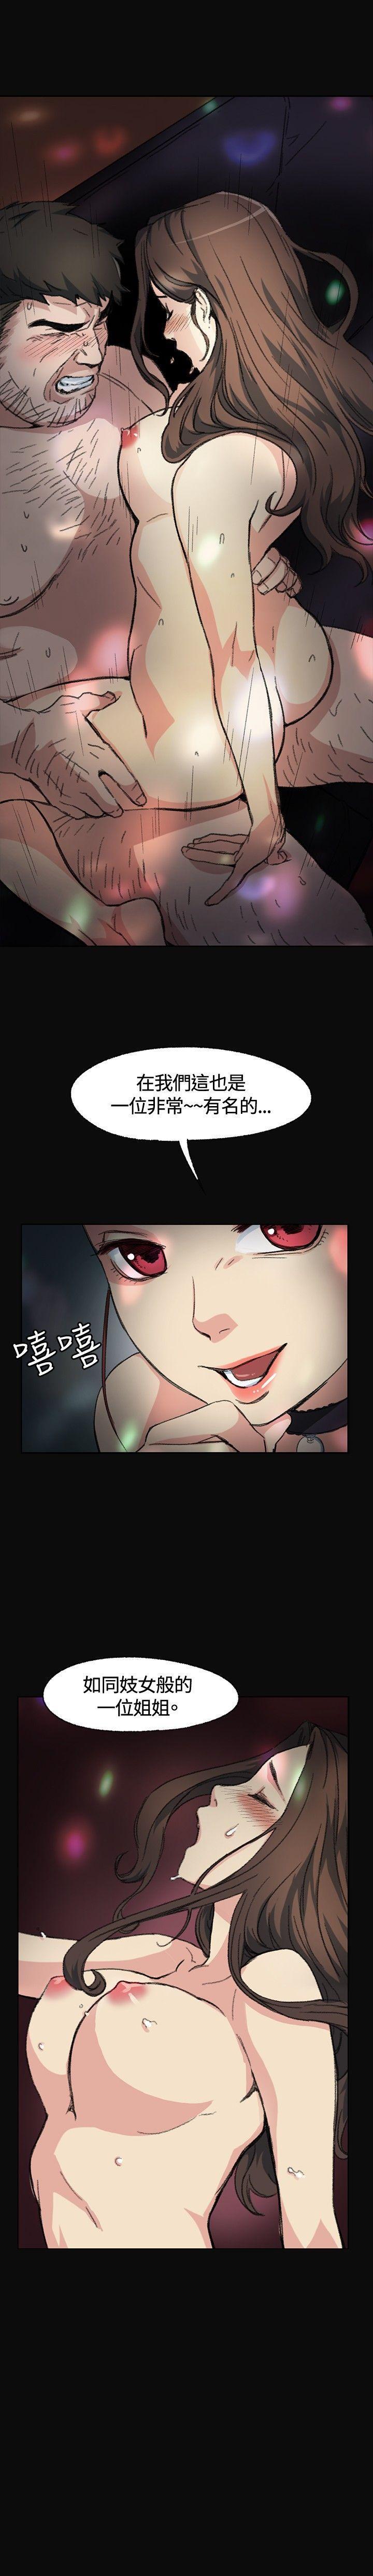 Cheating Wife 偶然 1-53 Teenfuns - Page 9